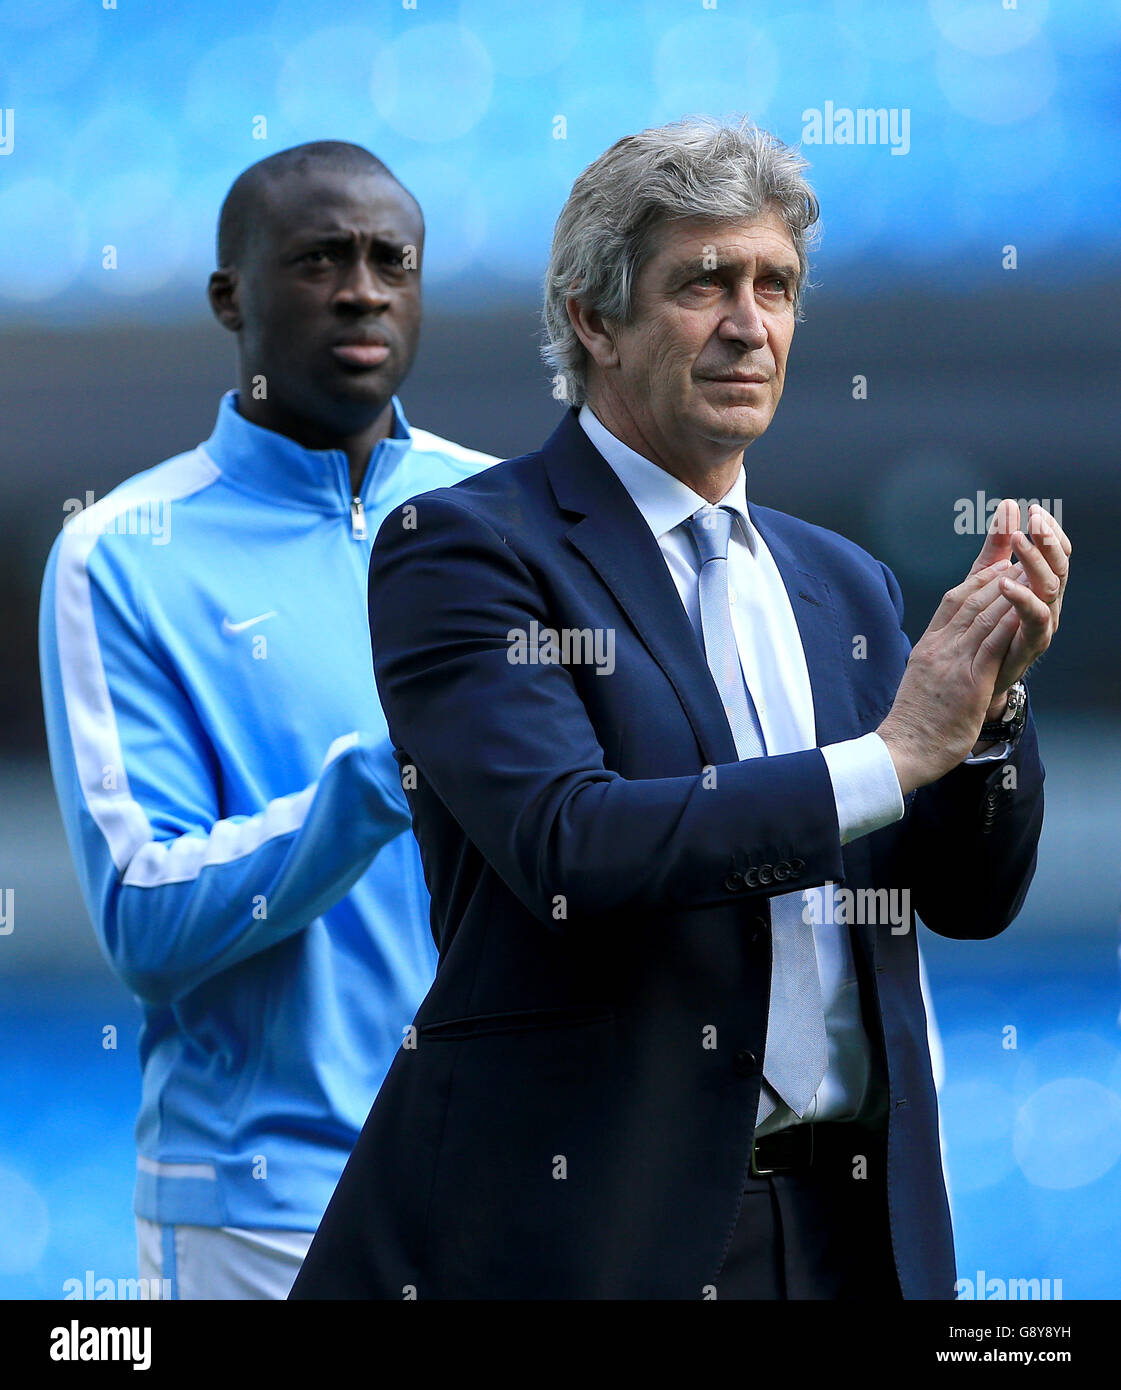 Manchester City manager Manuel Pellegrini applauds the fans after the game with Yaya Toure during the Barclays Premier League match at the Etihad Stadium, Manchester. Stock Photo